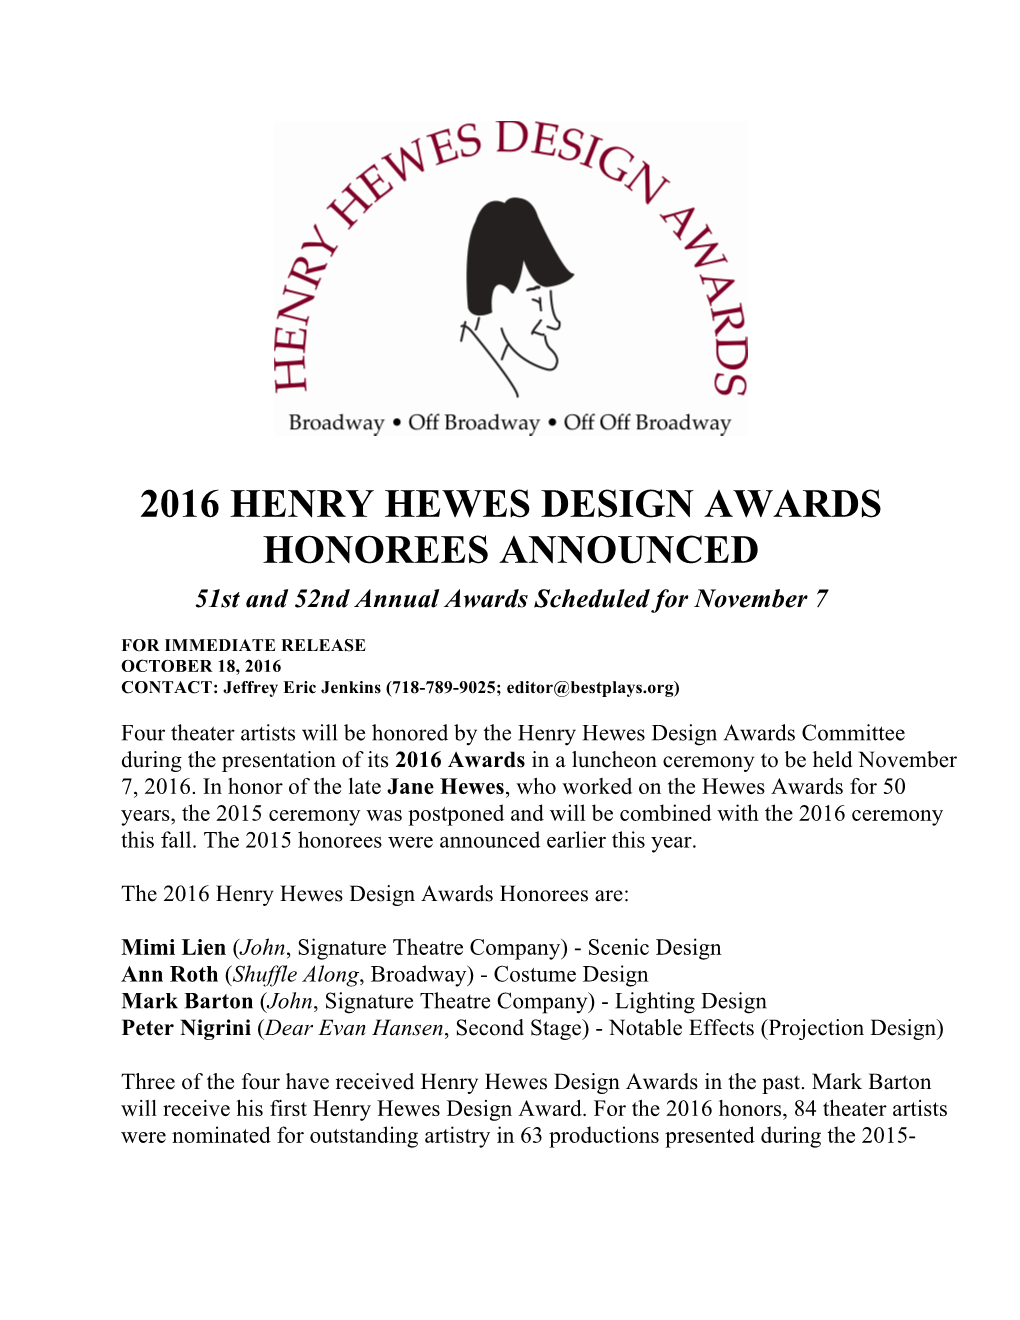 2016 Henry Hewes Design Awards Honorees Announced